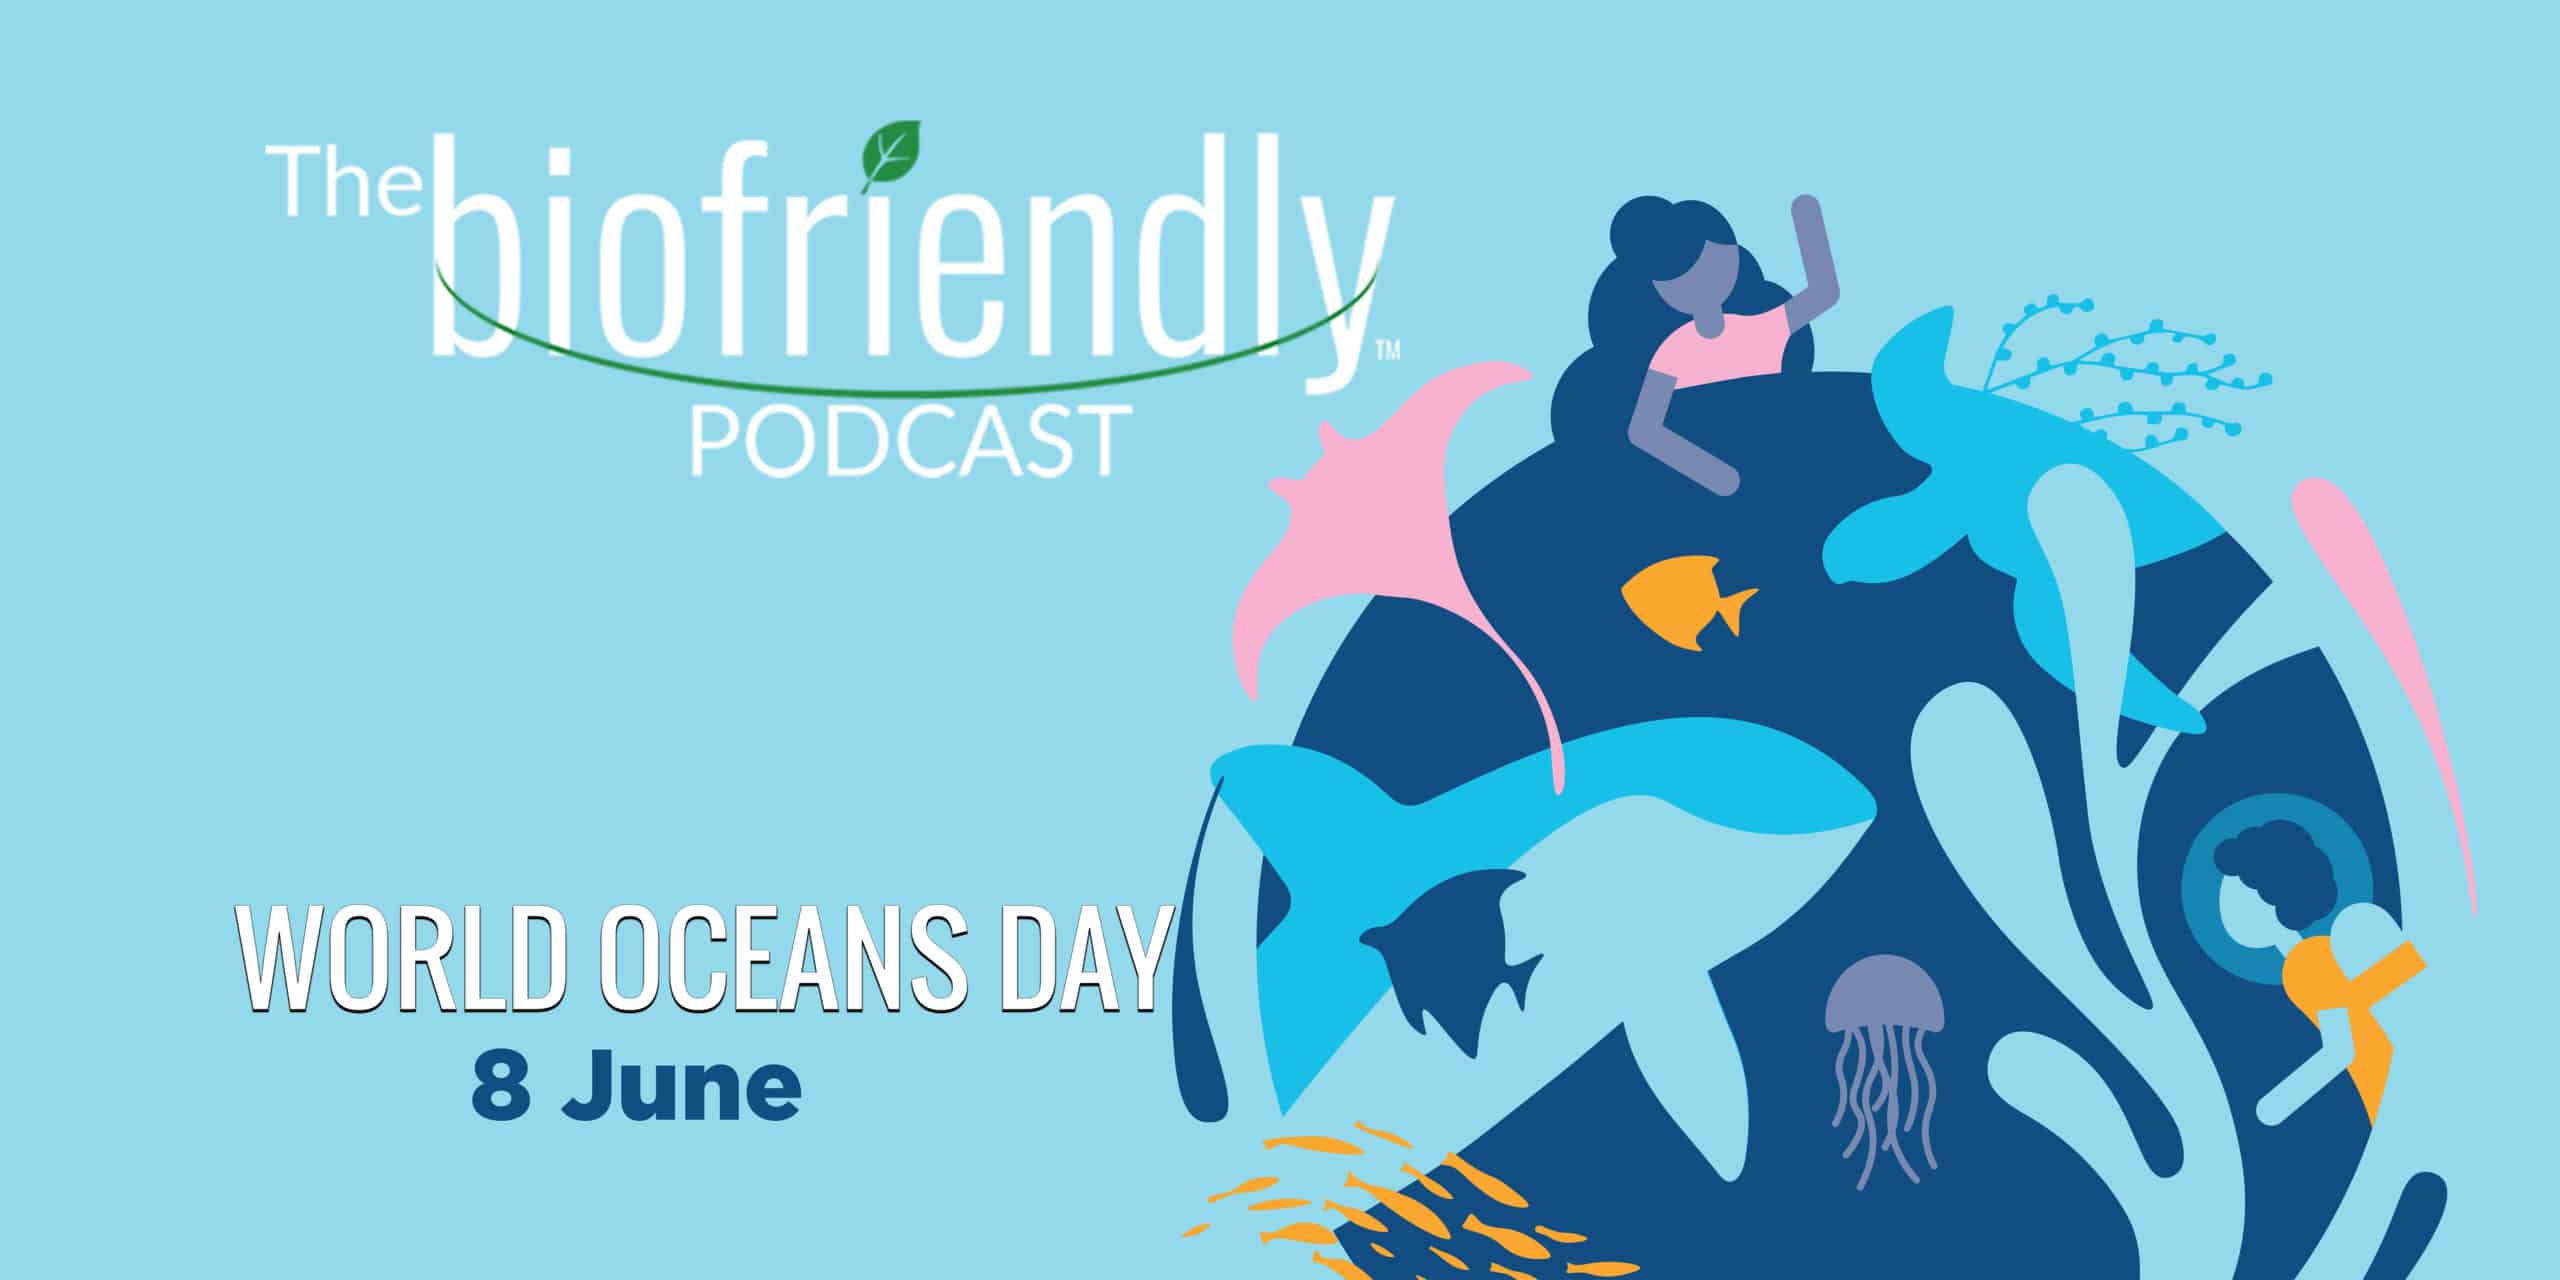 The Biofriendly Podcast - Episode 16 - World Oceans Day